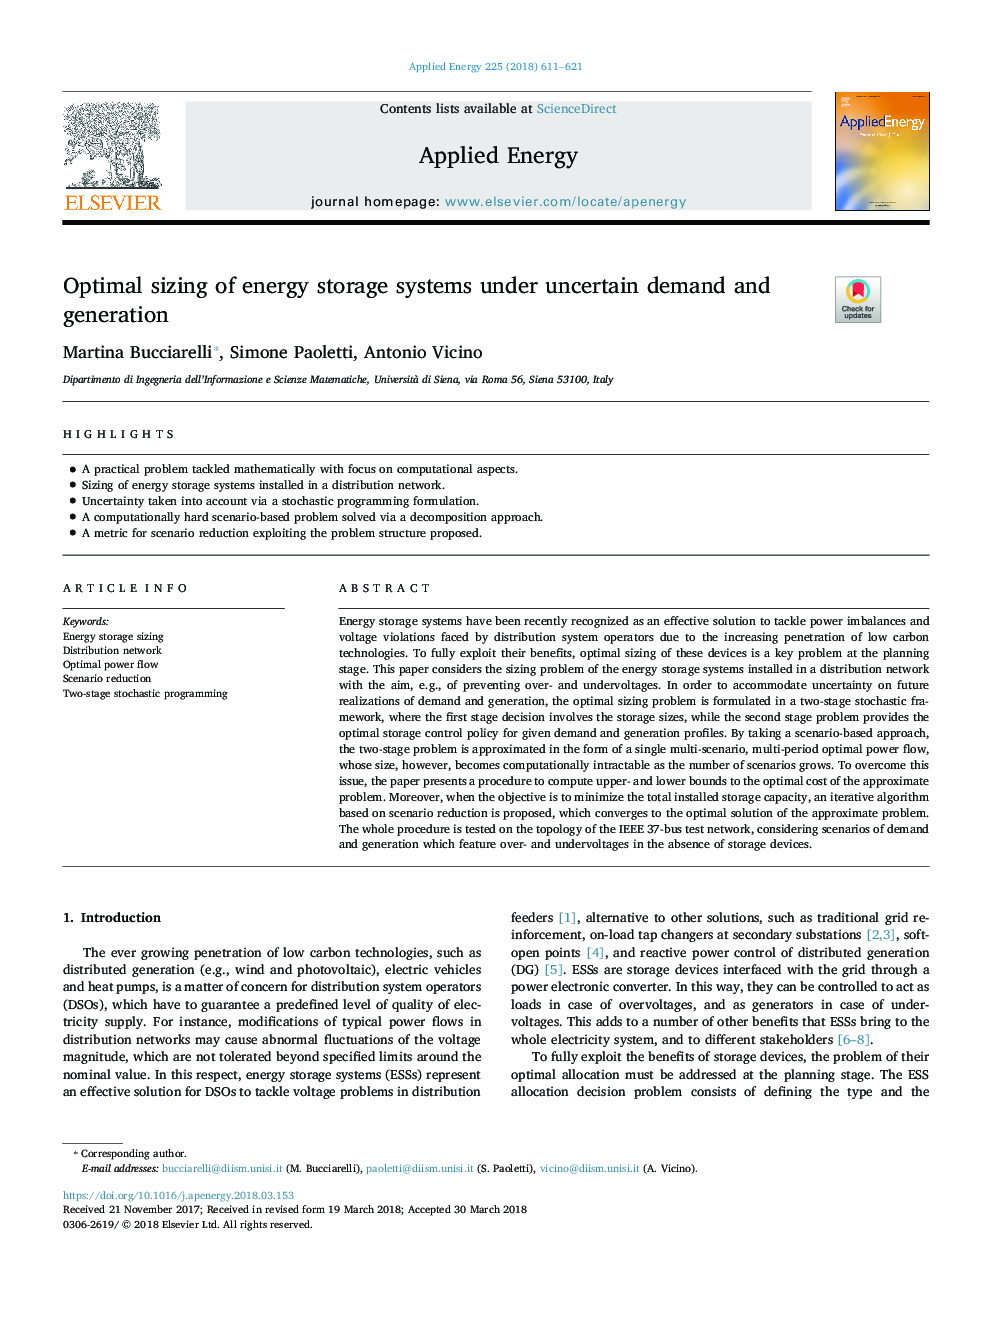 Optimal sizing of energy storage systems under uncertain demand and generation